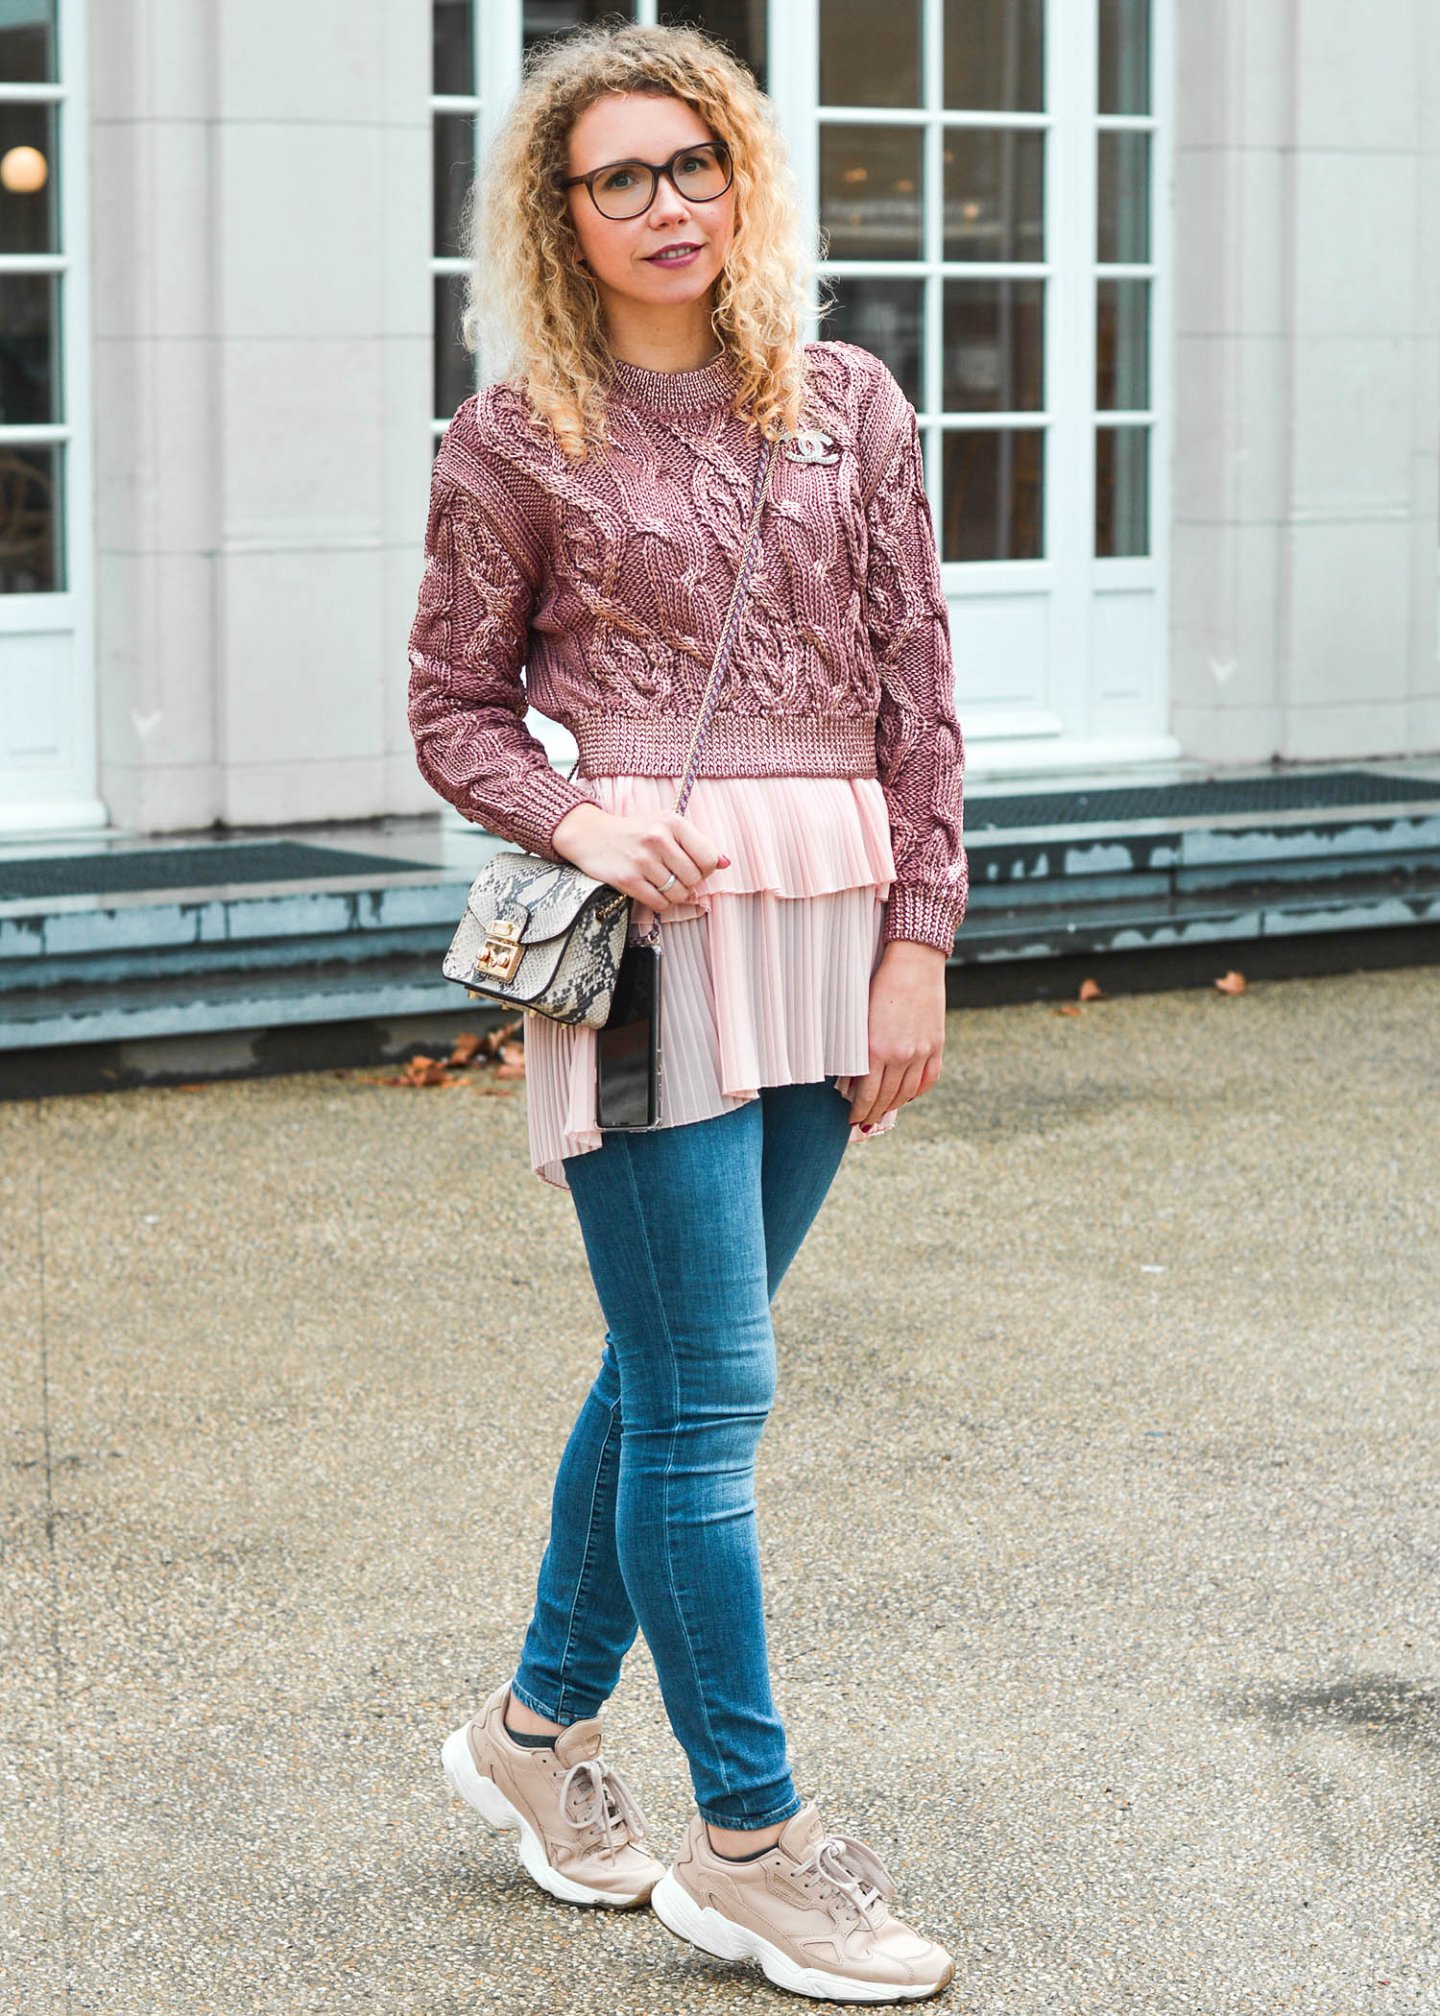 Cropped-Pullover-im-Lagenlook-kombinieren-Kationette-Fashionblog-Germany-Outfit